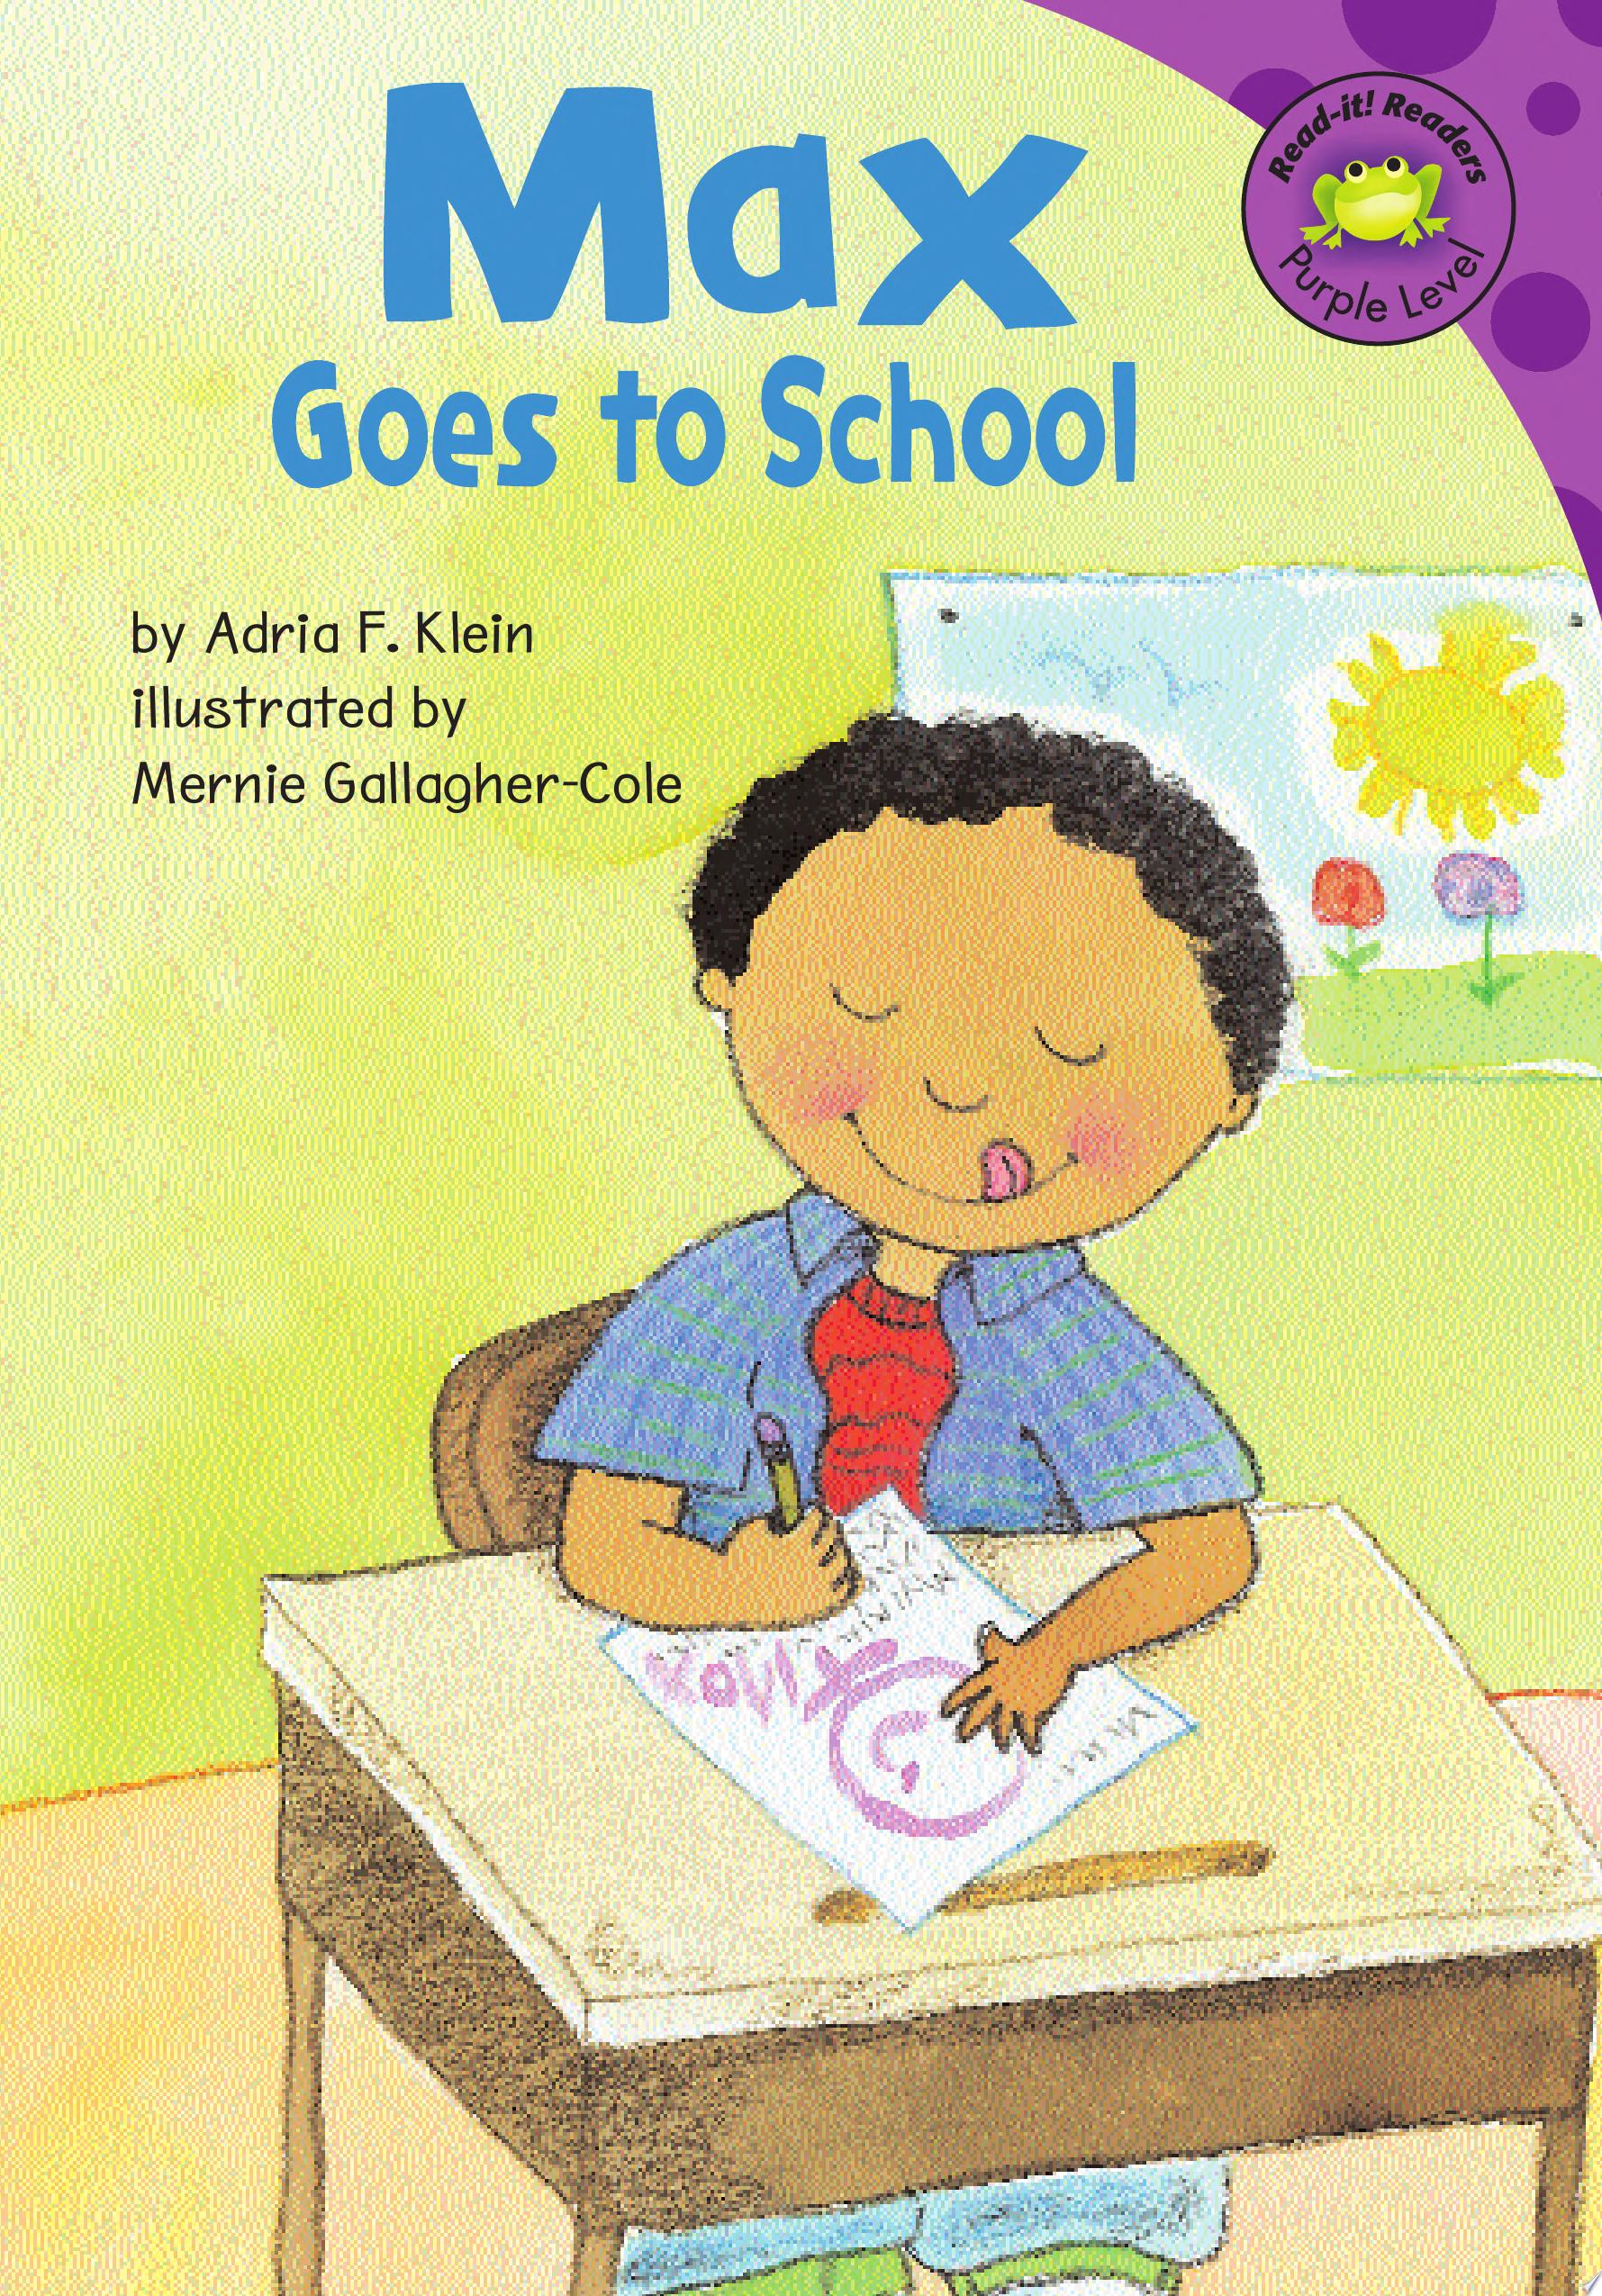 Image for "Max Goes to School"